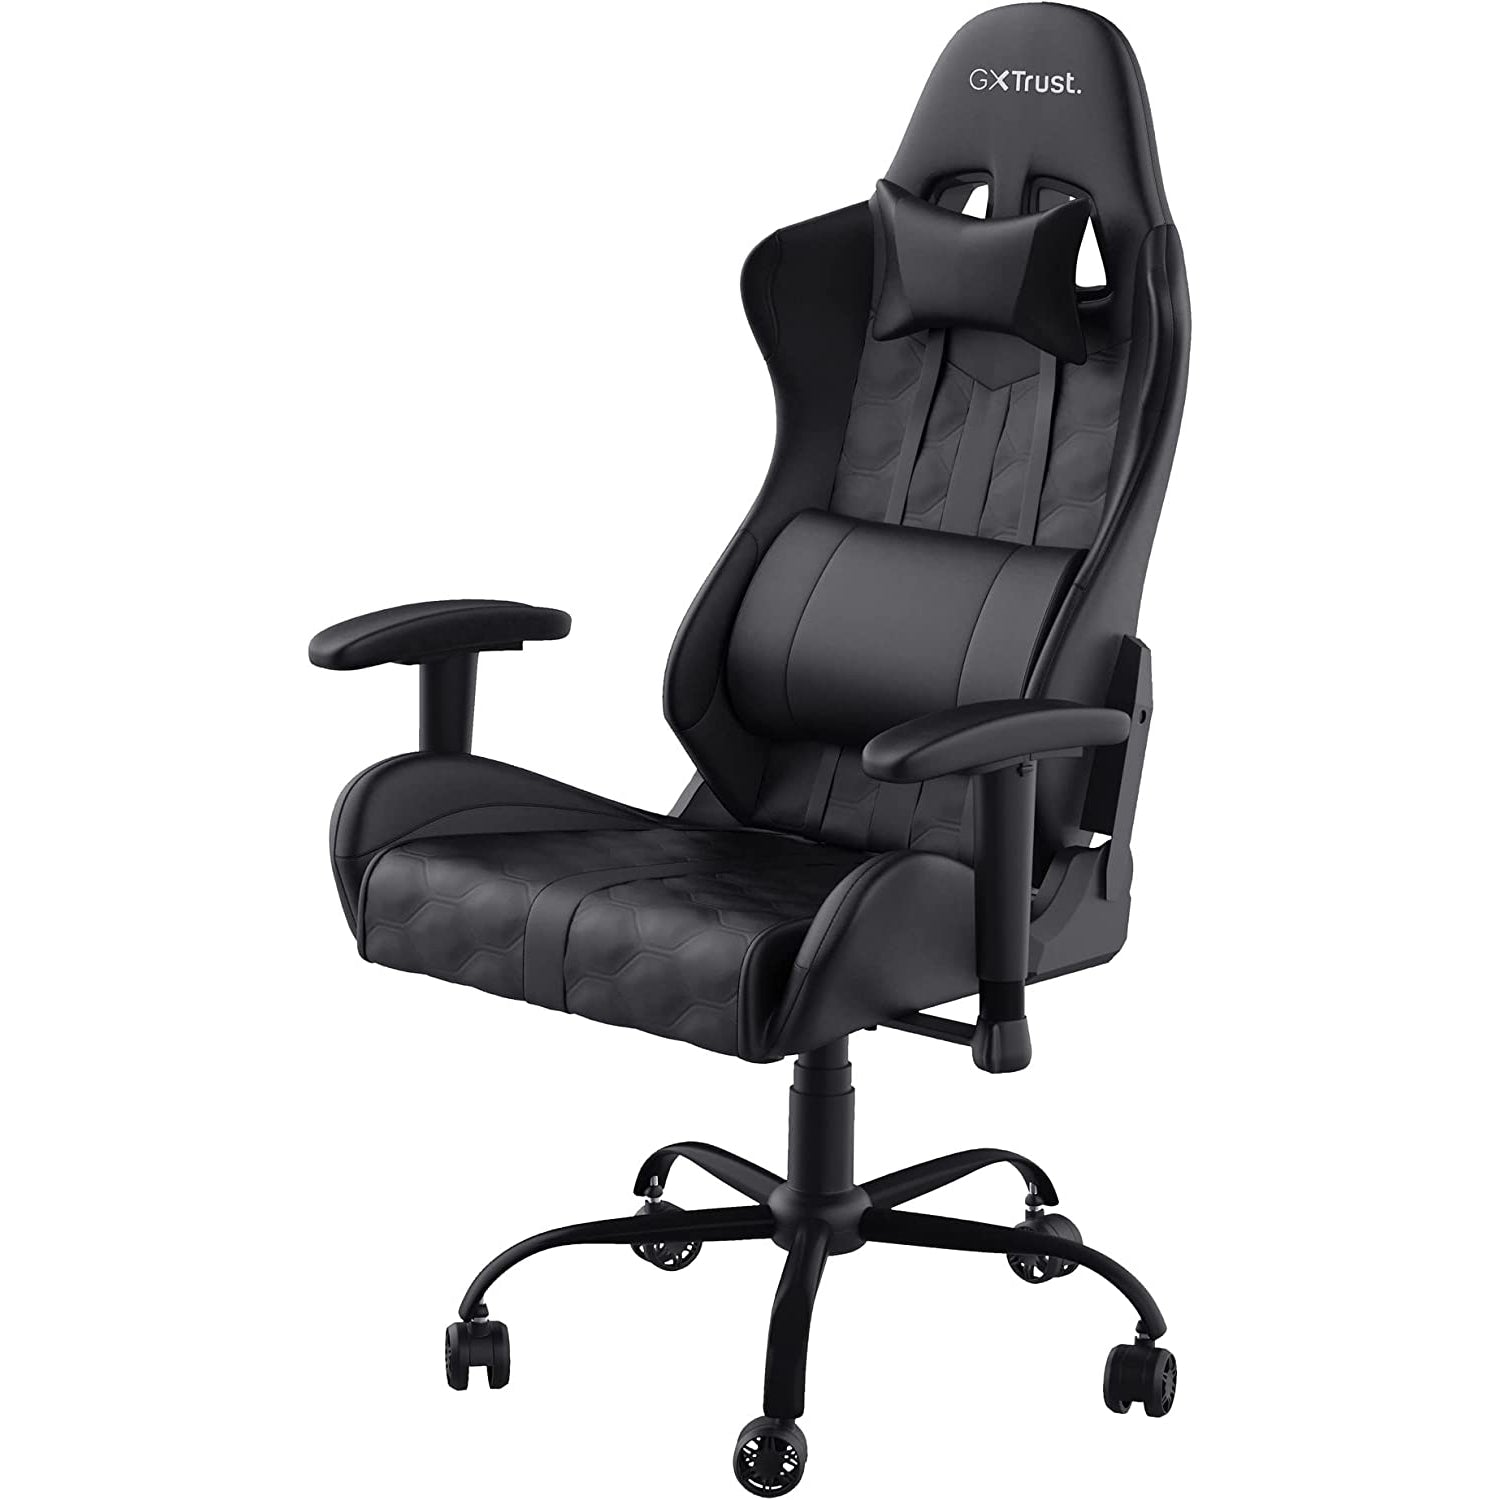 Trust Gaming GXT 708 Resto Gaming Chair - Black